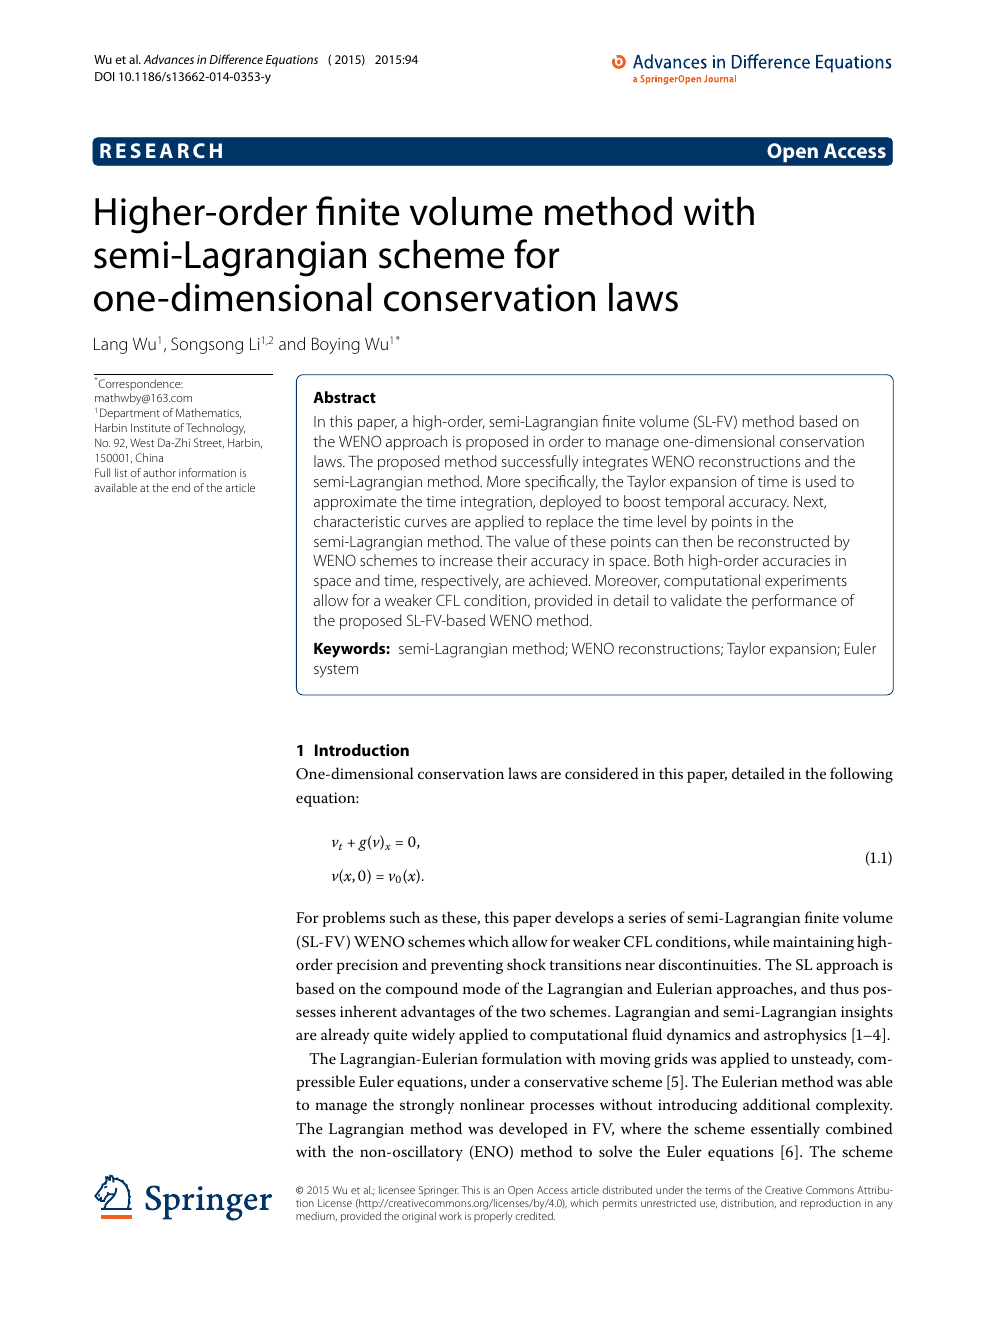 Higher Order Finite Volume Method With Semi Lagrangian Scheme For One Dimensional Conservation Laws Topic Of Research Paper In Mathematics Download Scholarly Article Pdf And Read For Free On Cyberleninka Open Science Hub